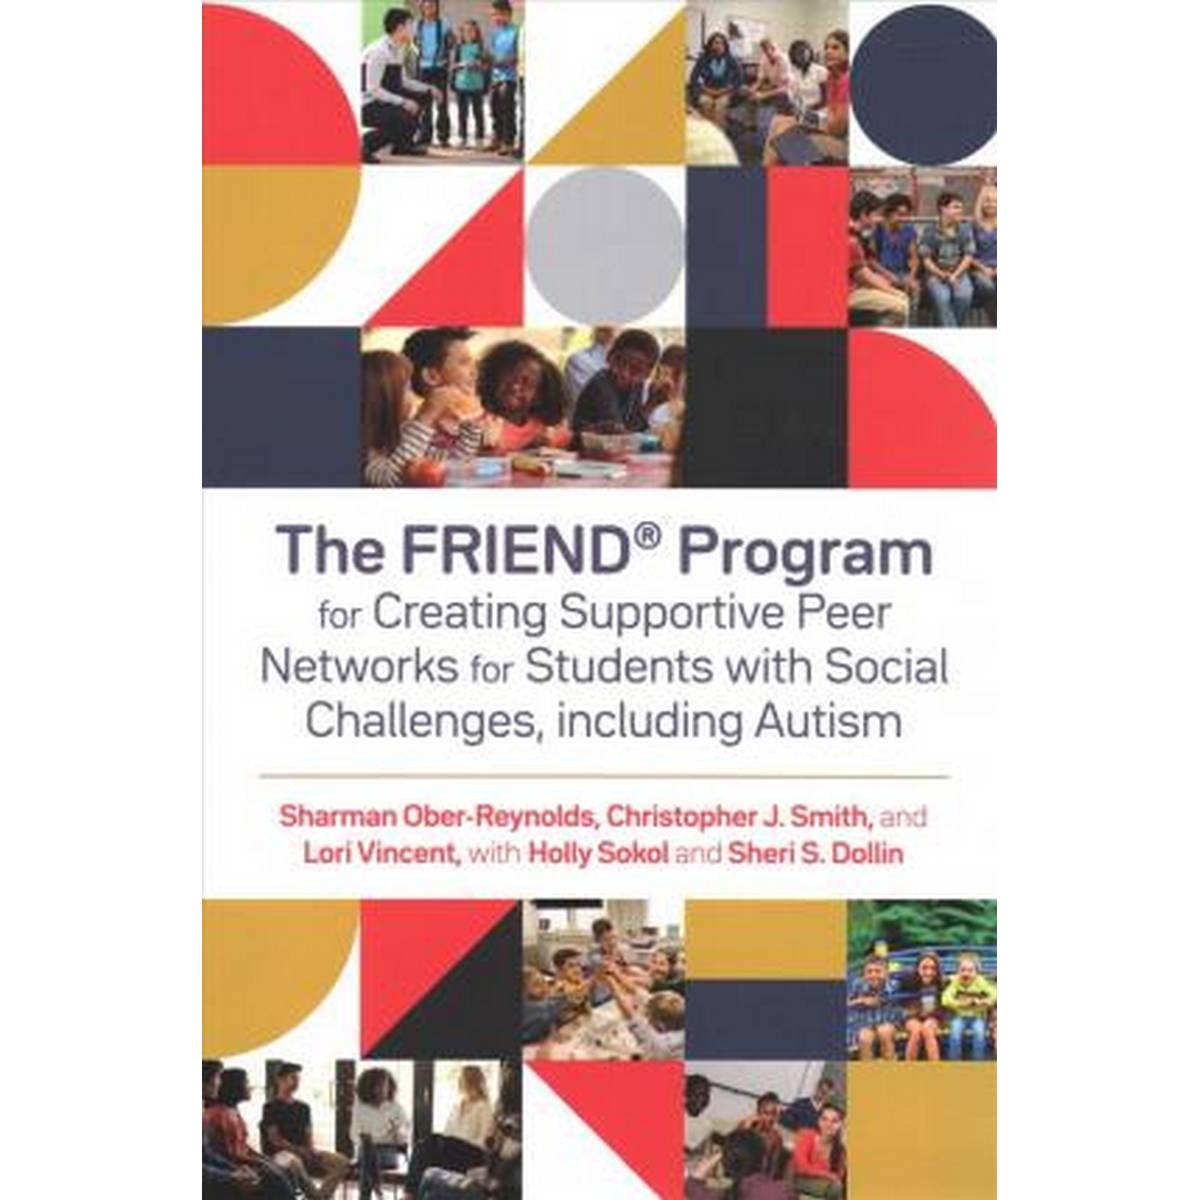 The FRIEND® Programme for Creating Supportive Peer Networks for Students with Social Challenges, including Autism